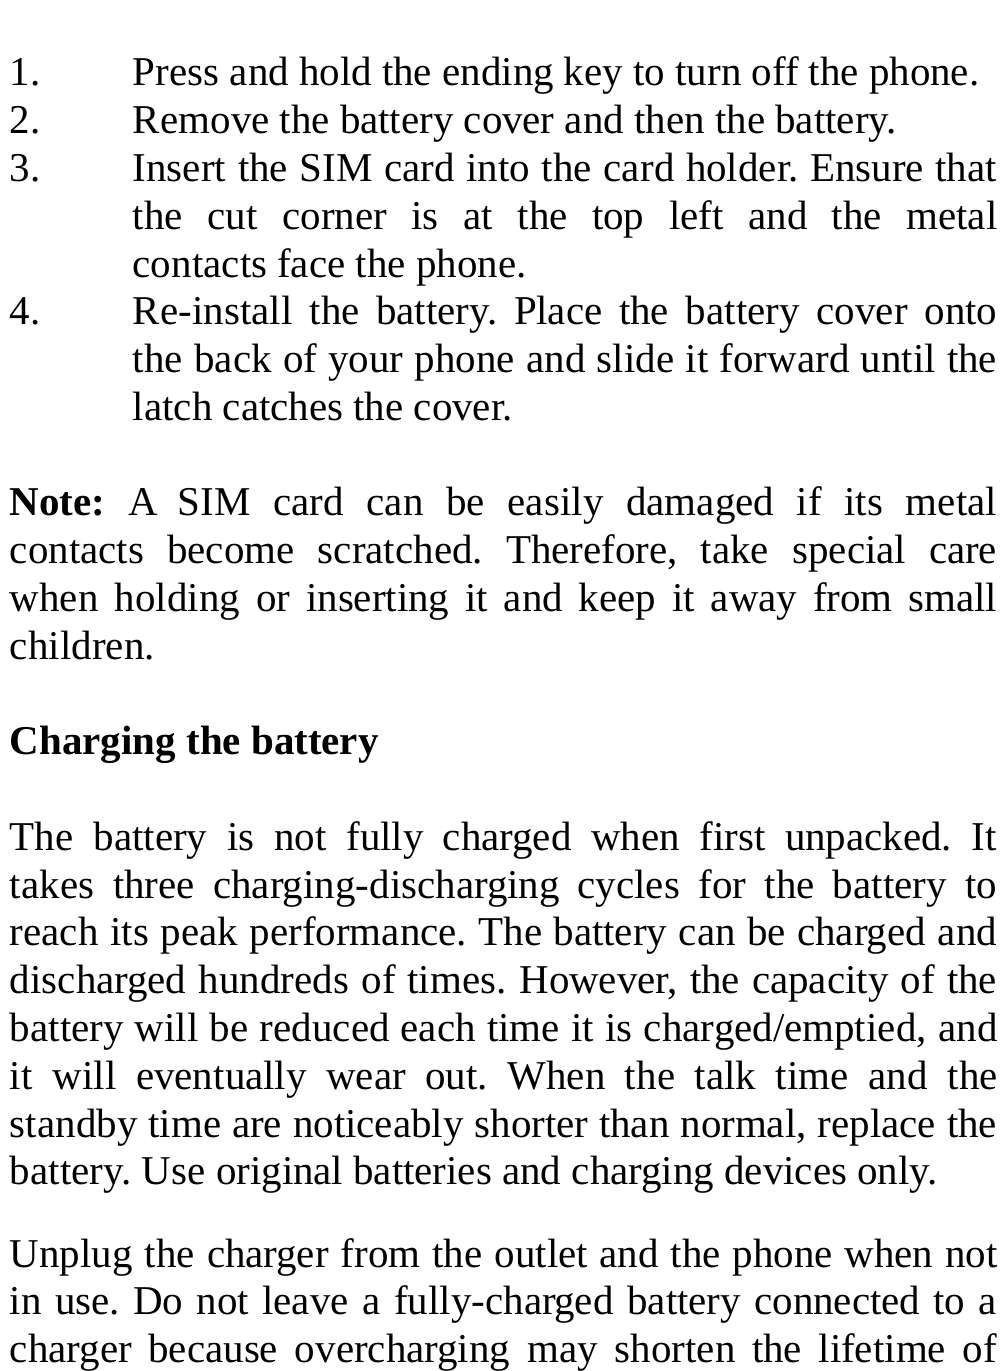   1. Press and hold the ending key to turn off the phone. 2. Remove the battery cover and then the battery. 3. Insert the SIM card into the card holder. Ensure that the cut corner is at the top left and the metal contacts face the phone. 4. Re-install the battery. Place the battery cover onto the back of your phone and slide it forward until the latch catches the cover.  Note:  A SIM card can be easily damaged if its metal contacts become scratched. Therefore, take special care when holding or inserting it and keep it away from small children.  Charging the battery  The battery is not fully charged when first unpacked. It takes three charging-discharging cycles for the battery to reach its peak performance. The battery can be charged and discharged hundreds of times. However, the capacity of the battery will be reduced each time it is charged/emptied, and it will eventually wear out. When the talk time and the standby time are noticeably shorter than normal, replace the battery. Use original batteries and charging devices only. Unplug the charger from the outlet and the phone when not in use. Do not leave a fully-charged battery connected to a charger because overcharging may shorten the lifetime of 